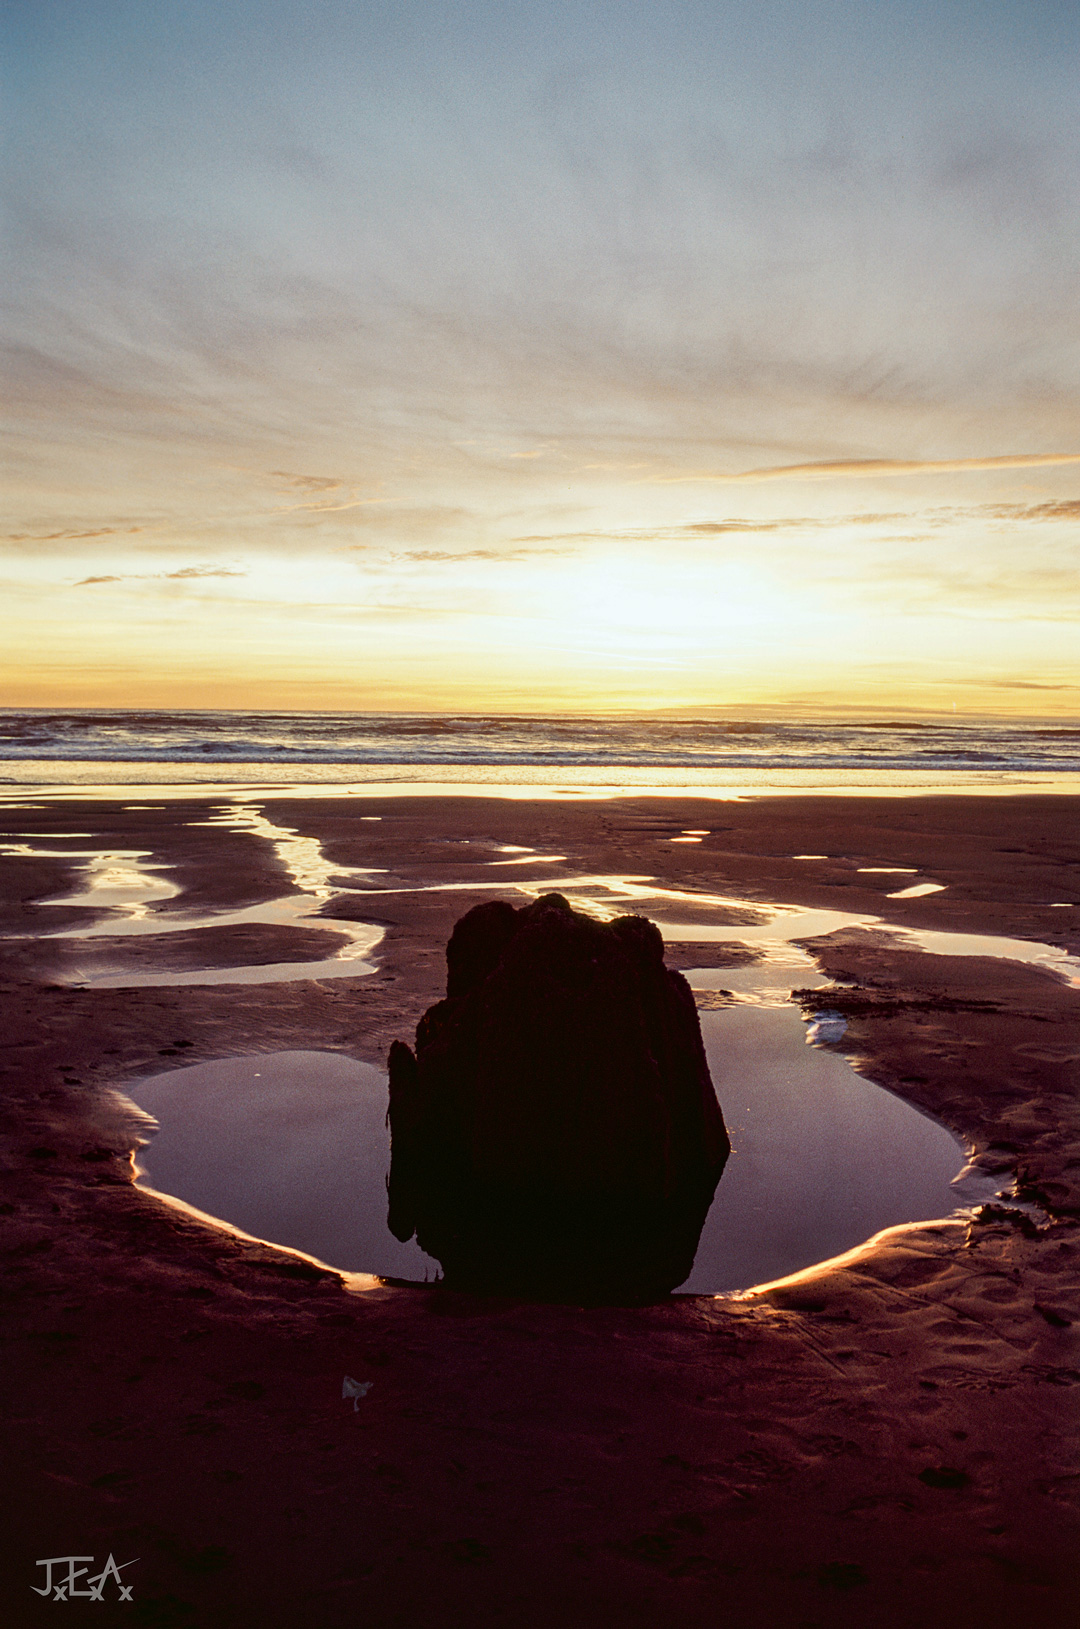 A portrait image of an ancient stump on Neskowin Beach at sunset.